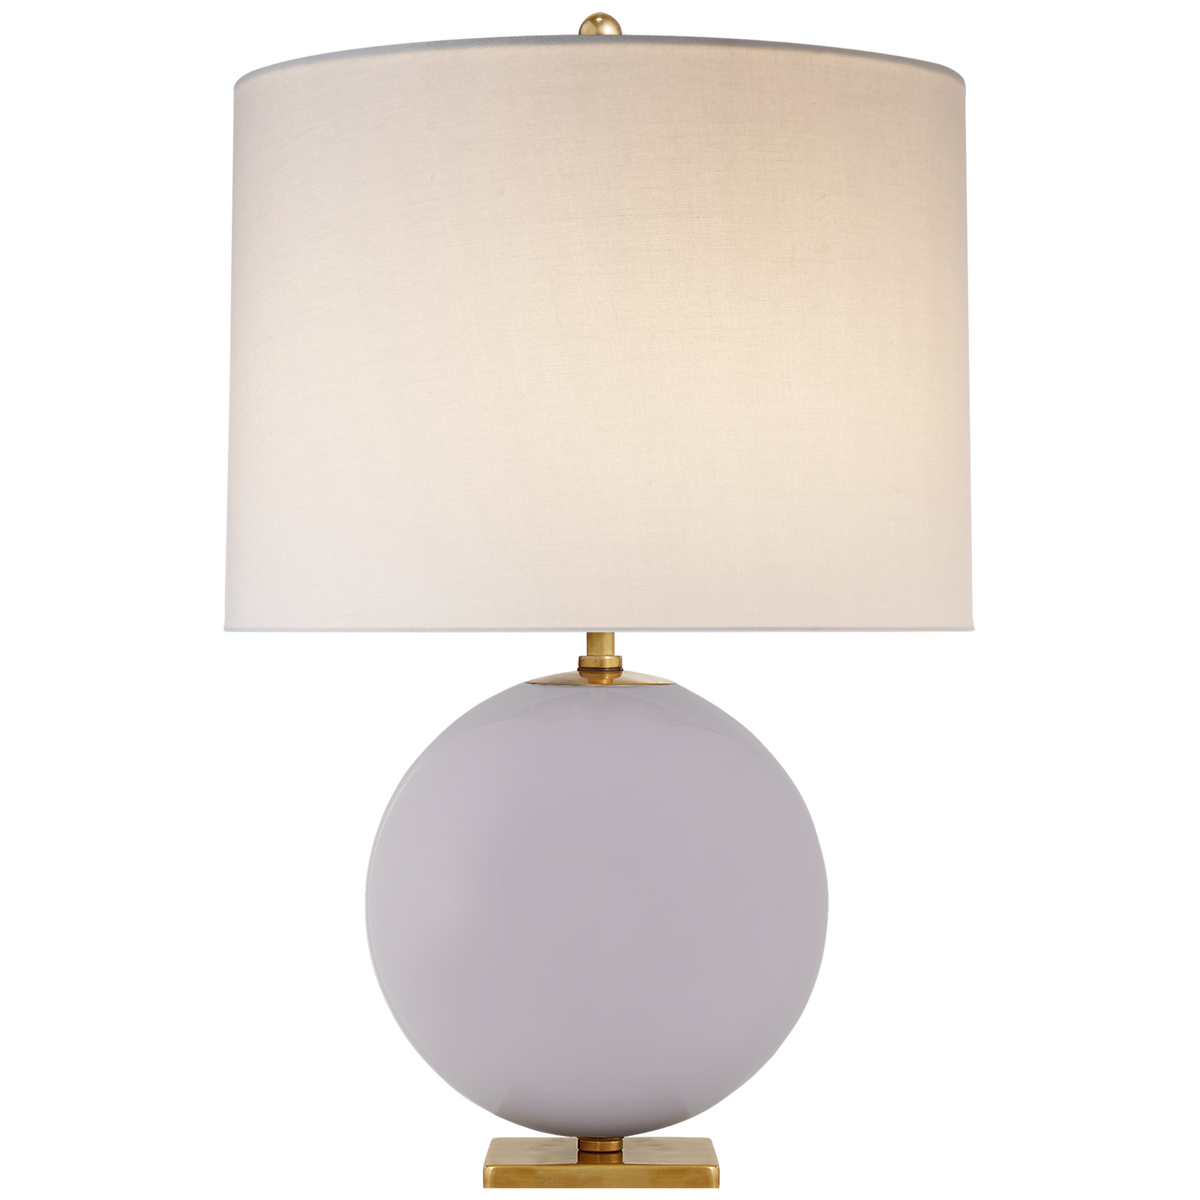 Elsie Table Lamp - Lilac Painted Glass with Cream Linen Shade